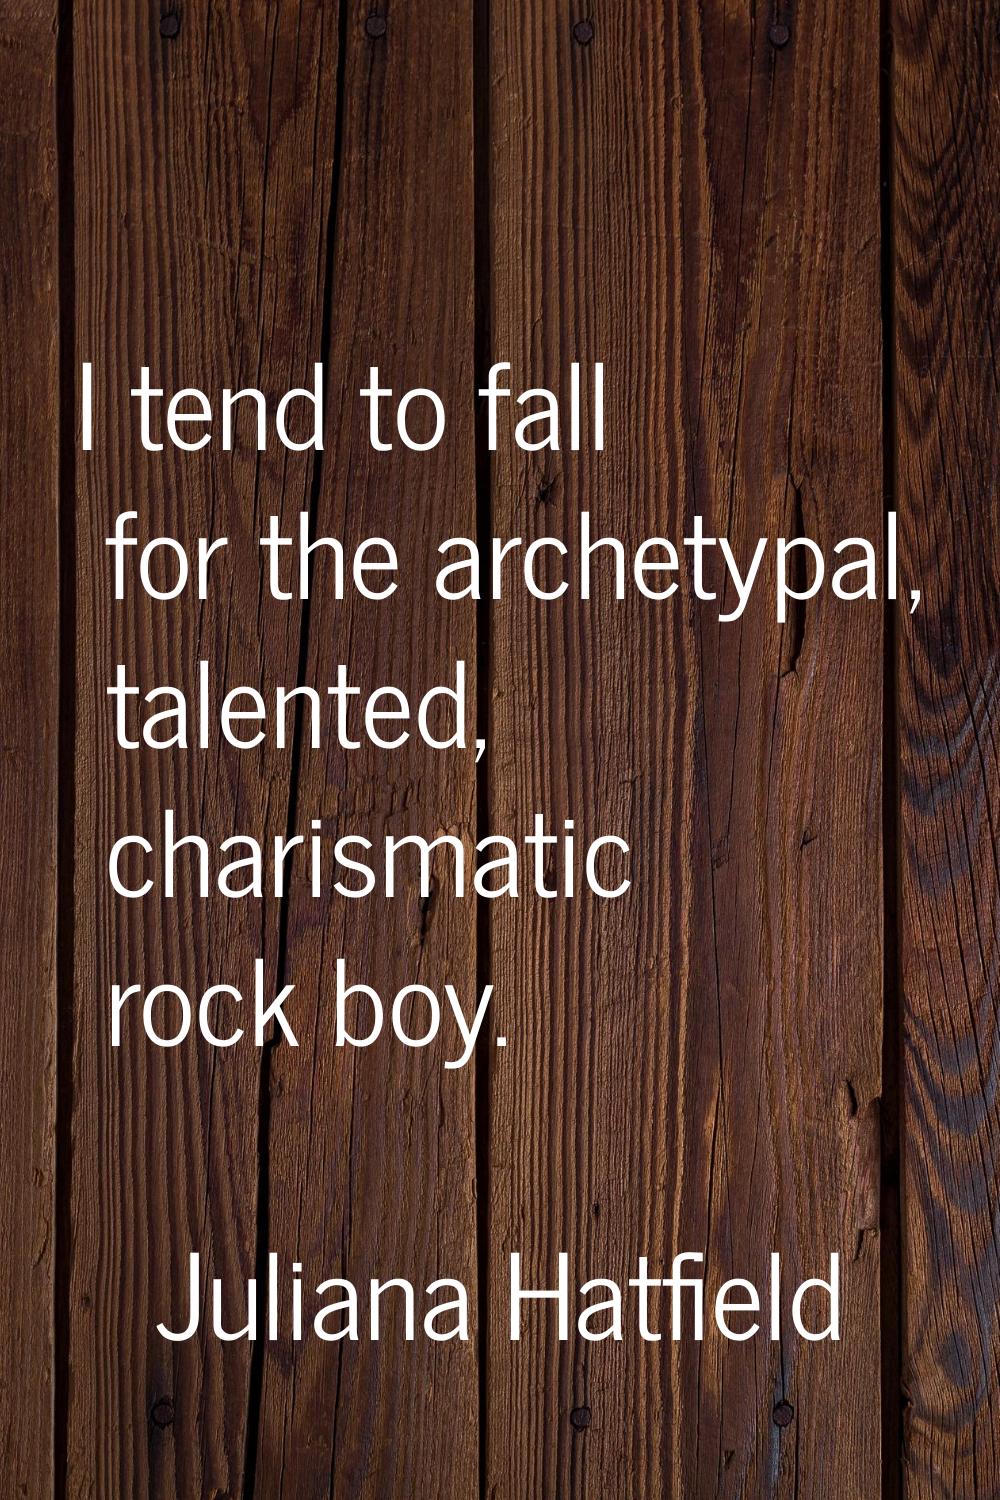 I tend to fall for the archetypal, talented, charismatic rock boy.